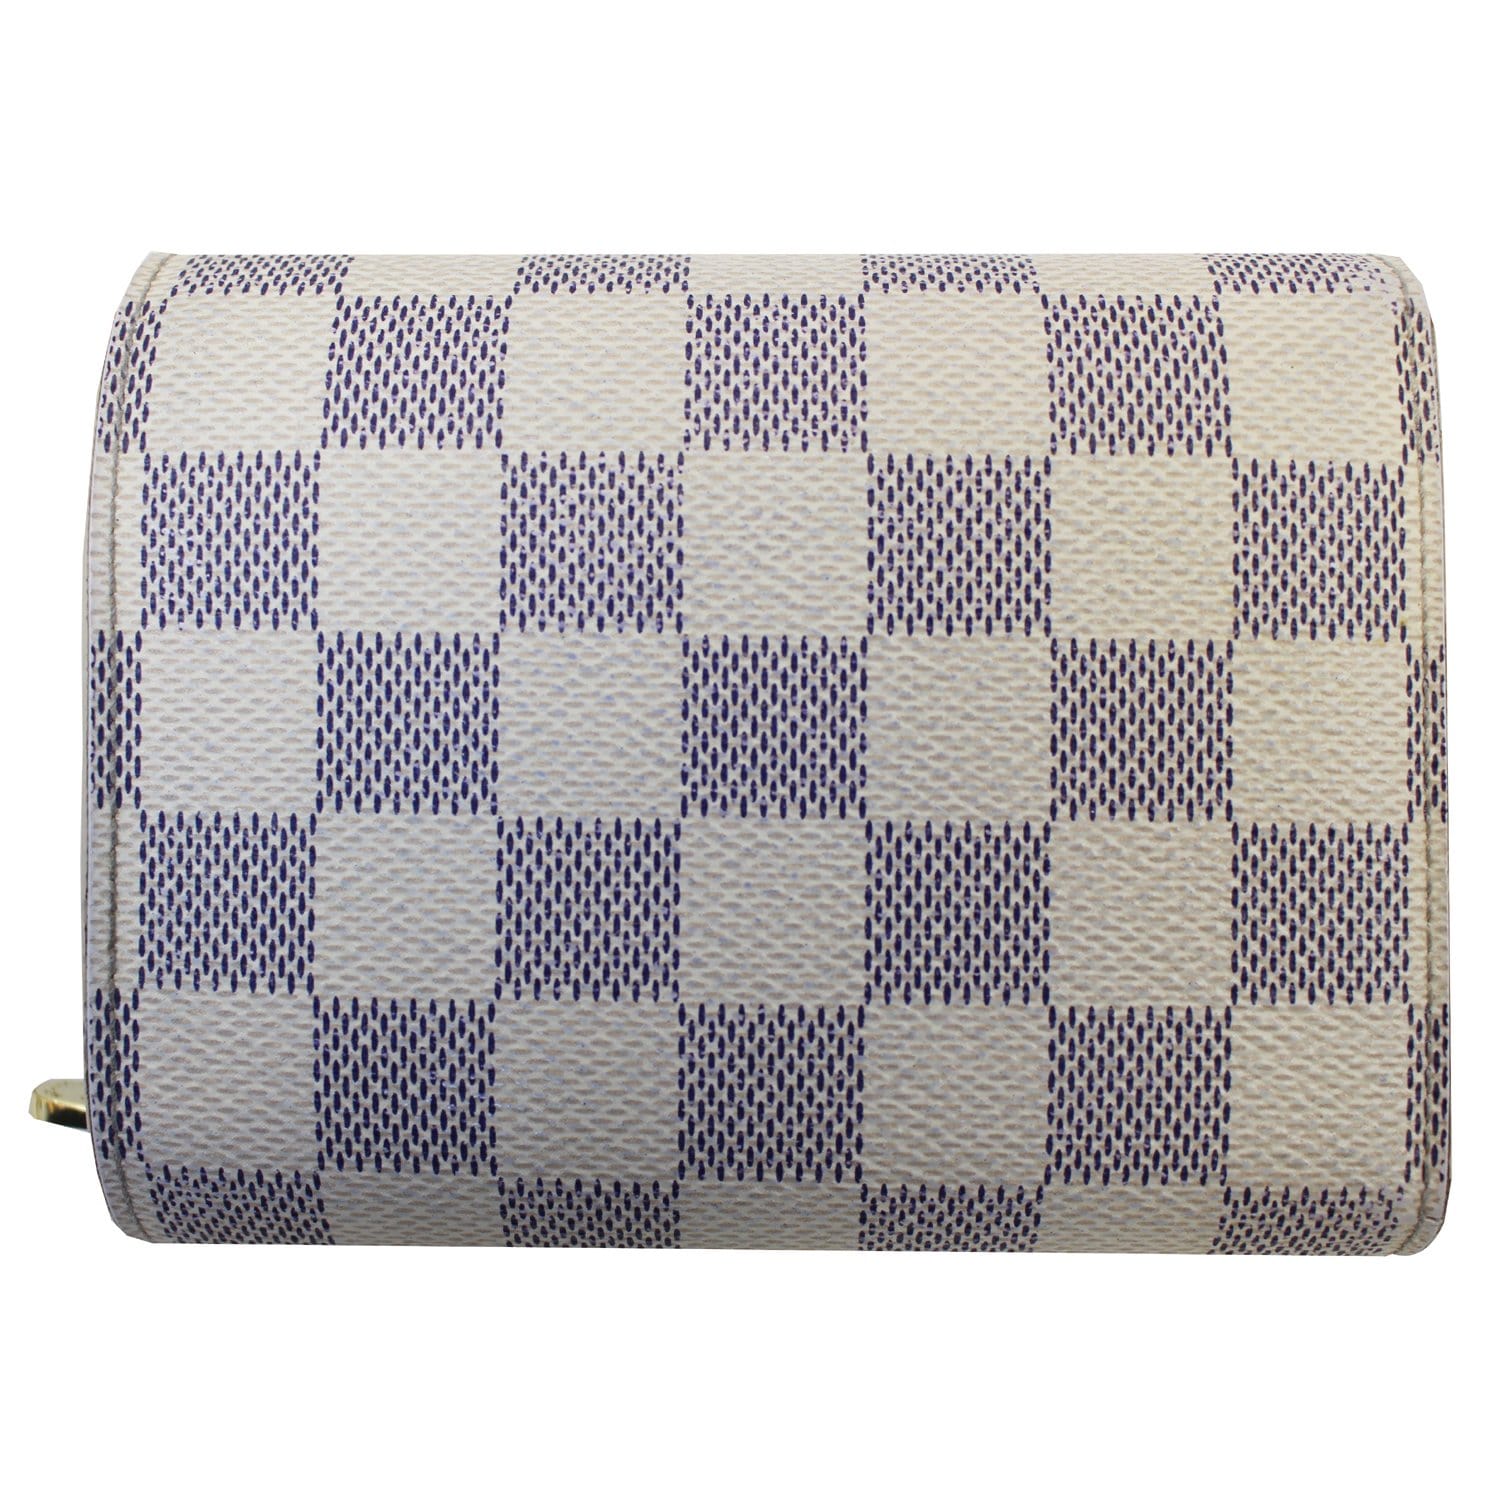 Louis Vuitton Damier Azur Totally PM and Joey Compact Wallet now available  to purchase on w…